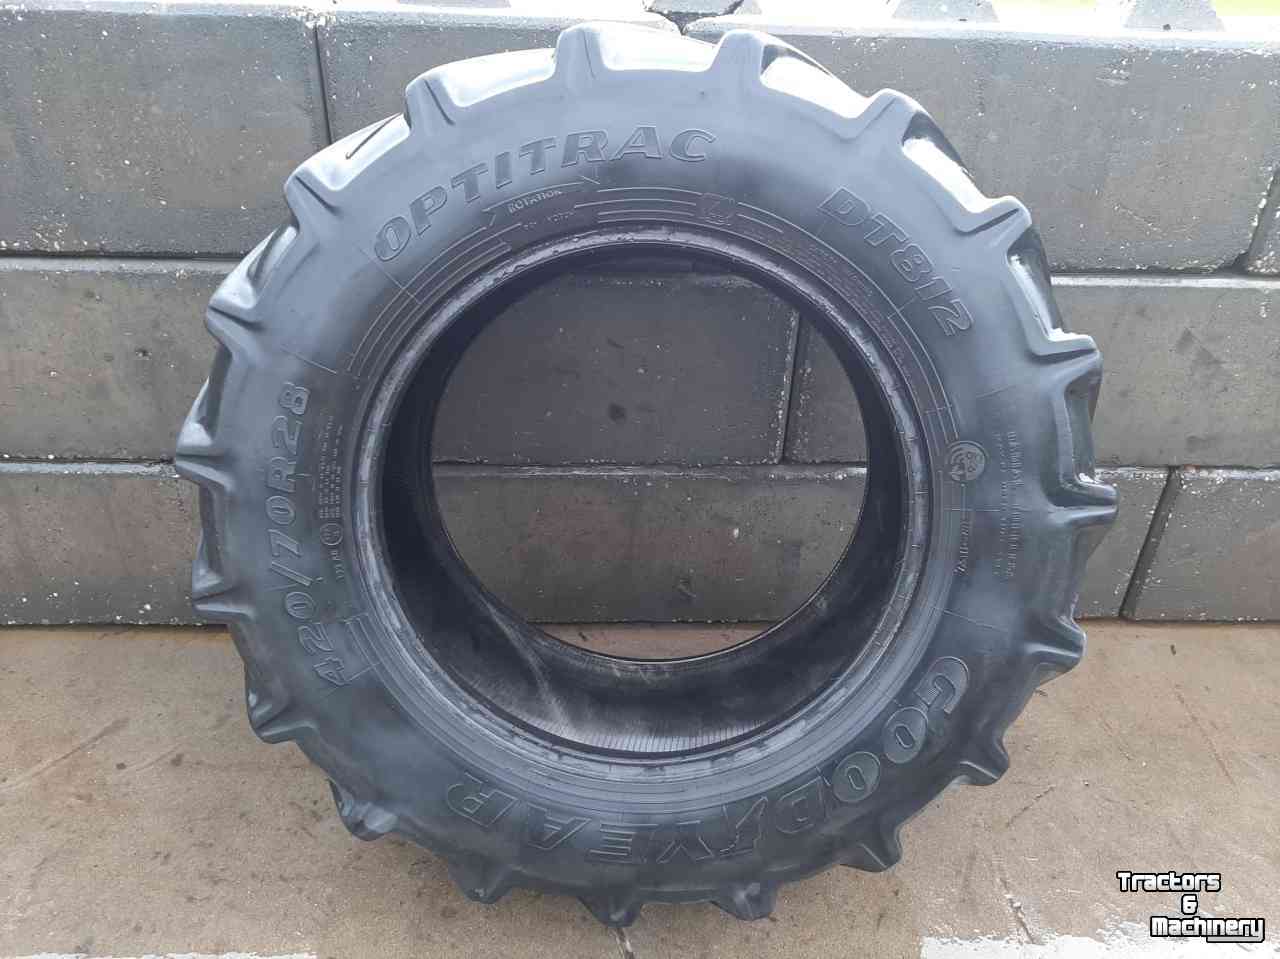 Wheels, Tyres, Rims & Dual spacers Good Year 420/70xR28  42070r28  band